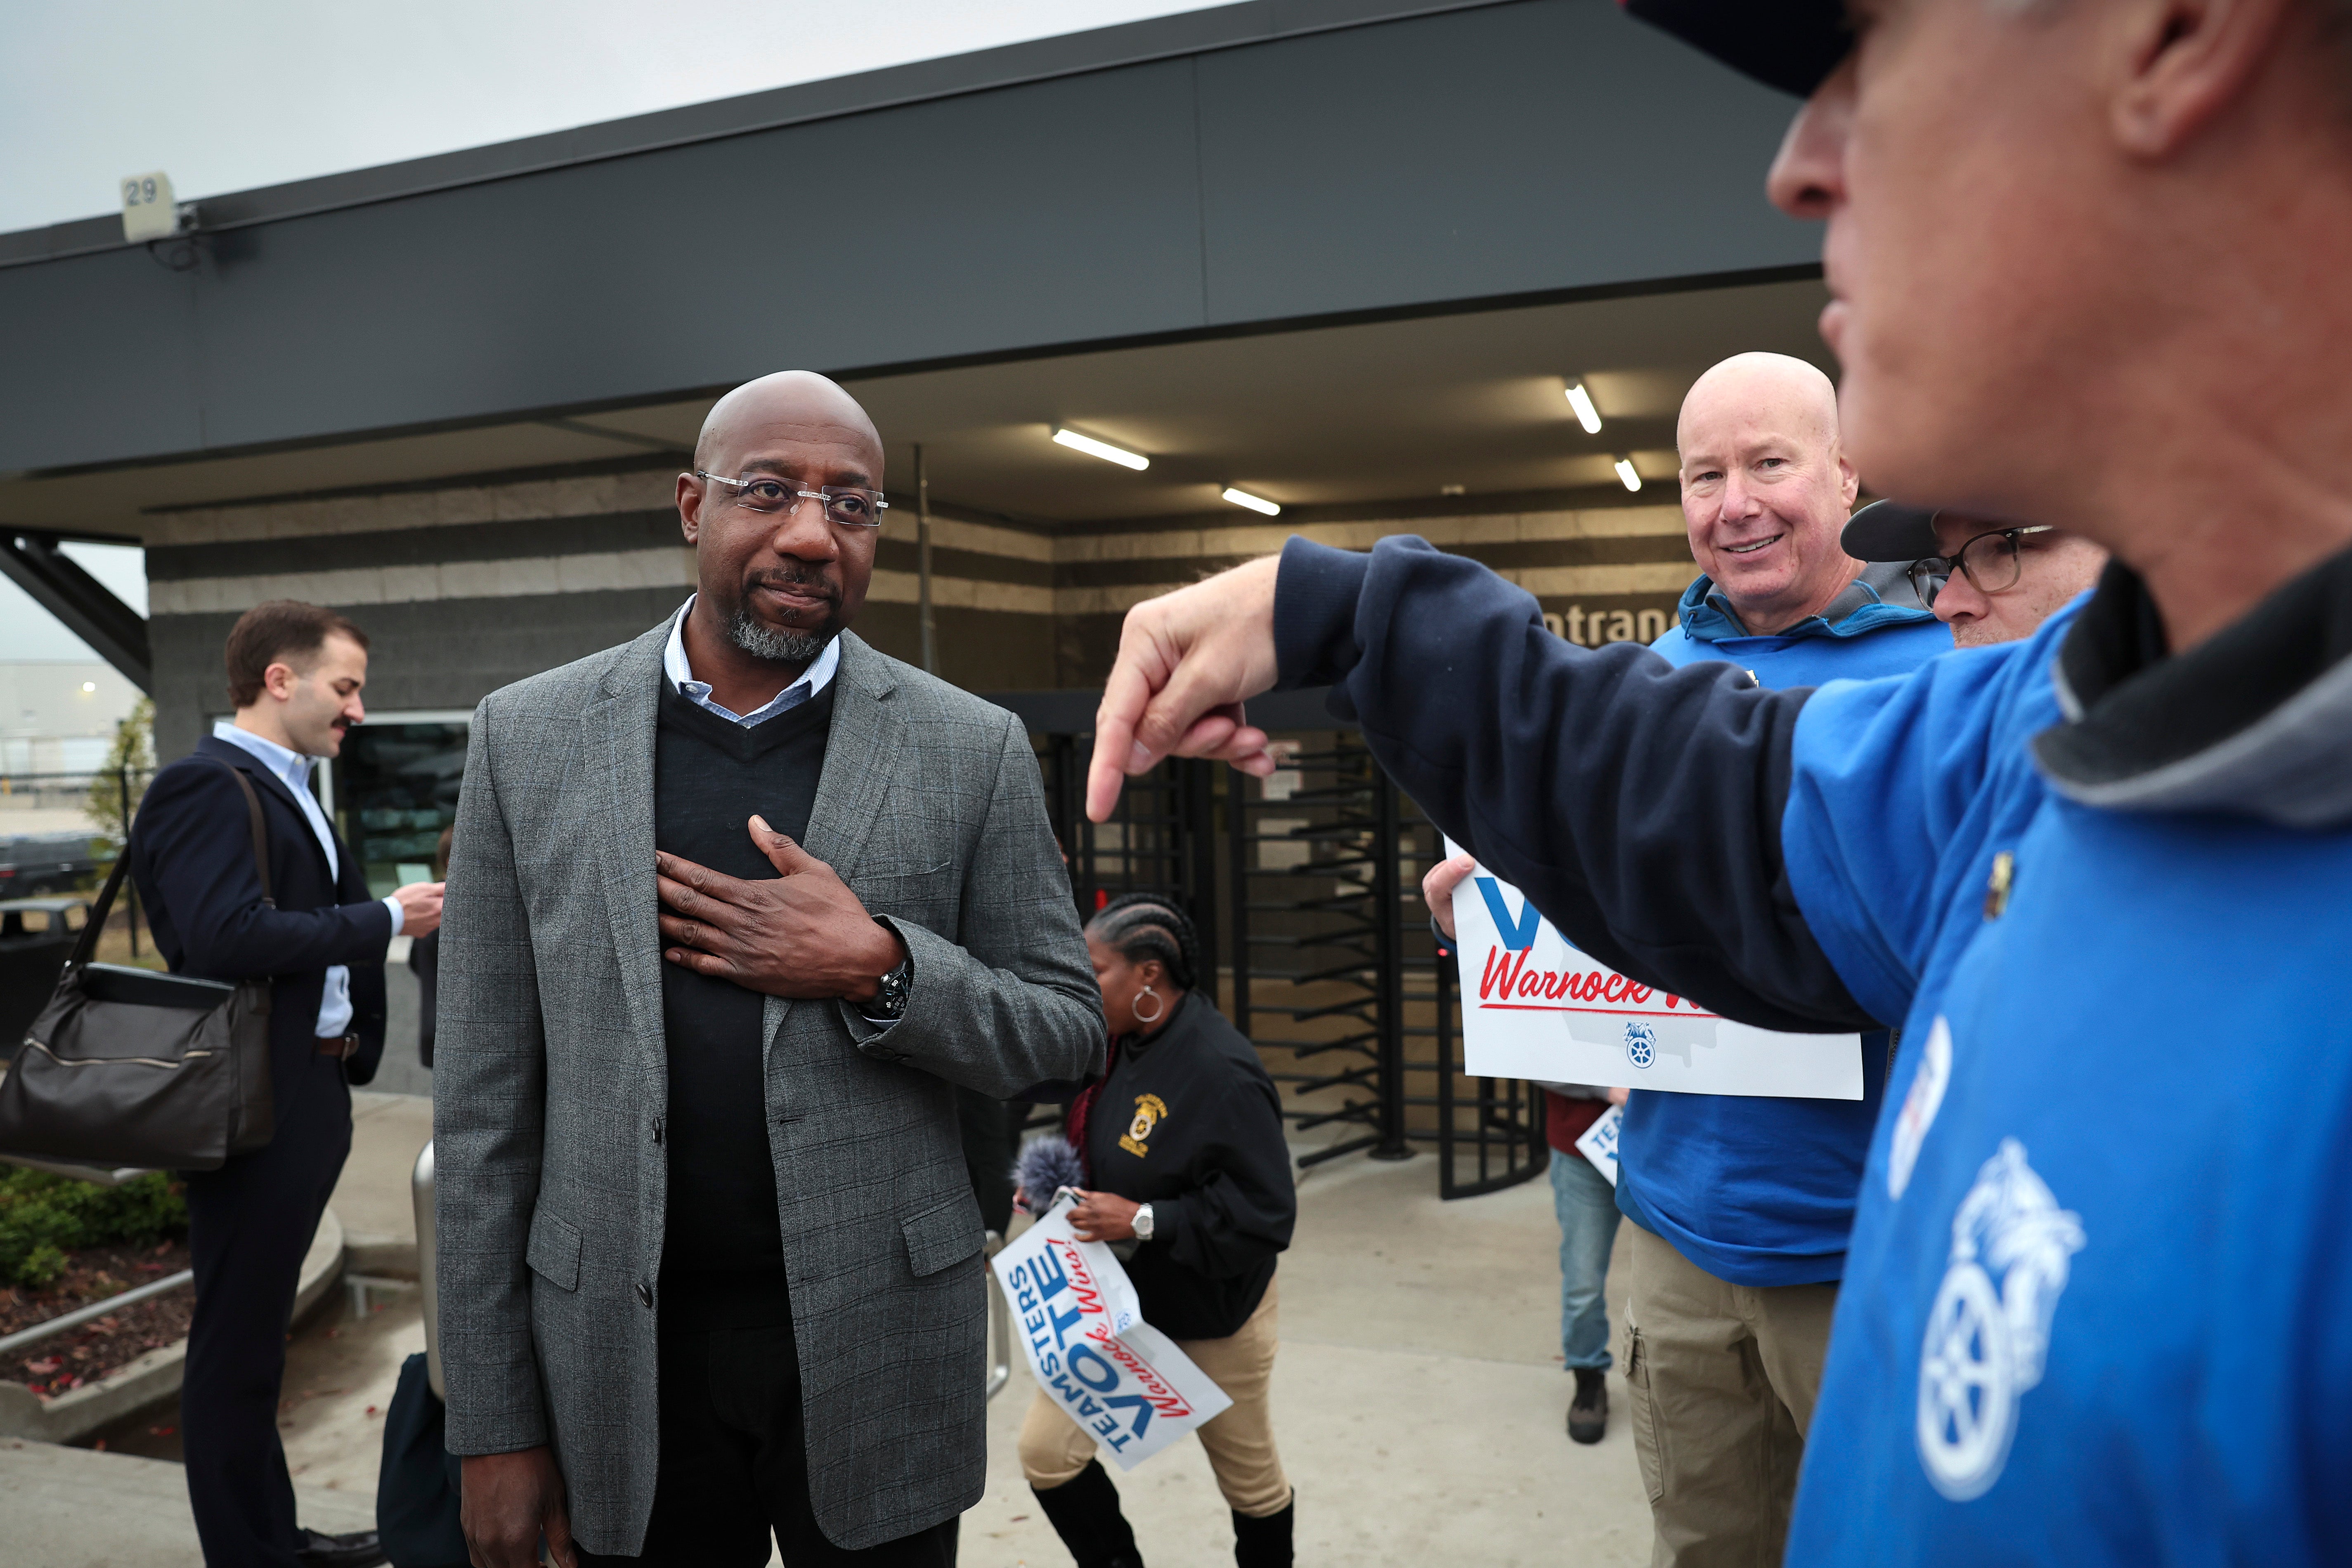 Georgia Democratic Senate candidate Raphael Warnock greets members of the Teamsters after speaking at a Get Out the Vote event at a UPS worksite 5 December 2022 in Atlanta, Georgia